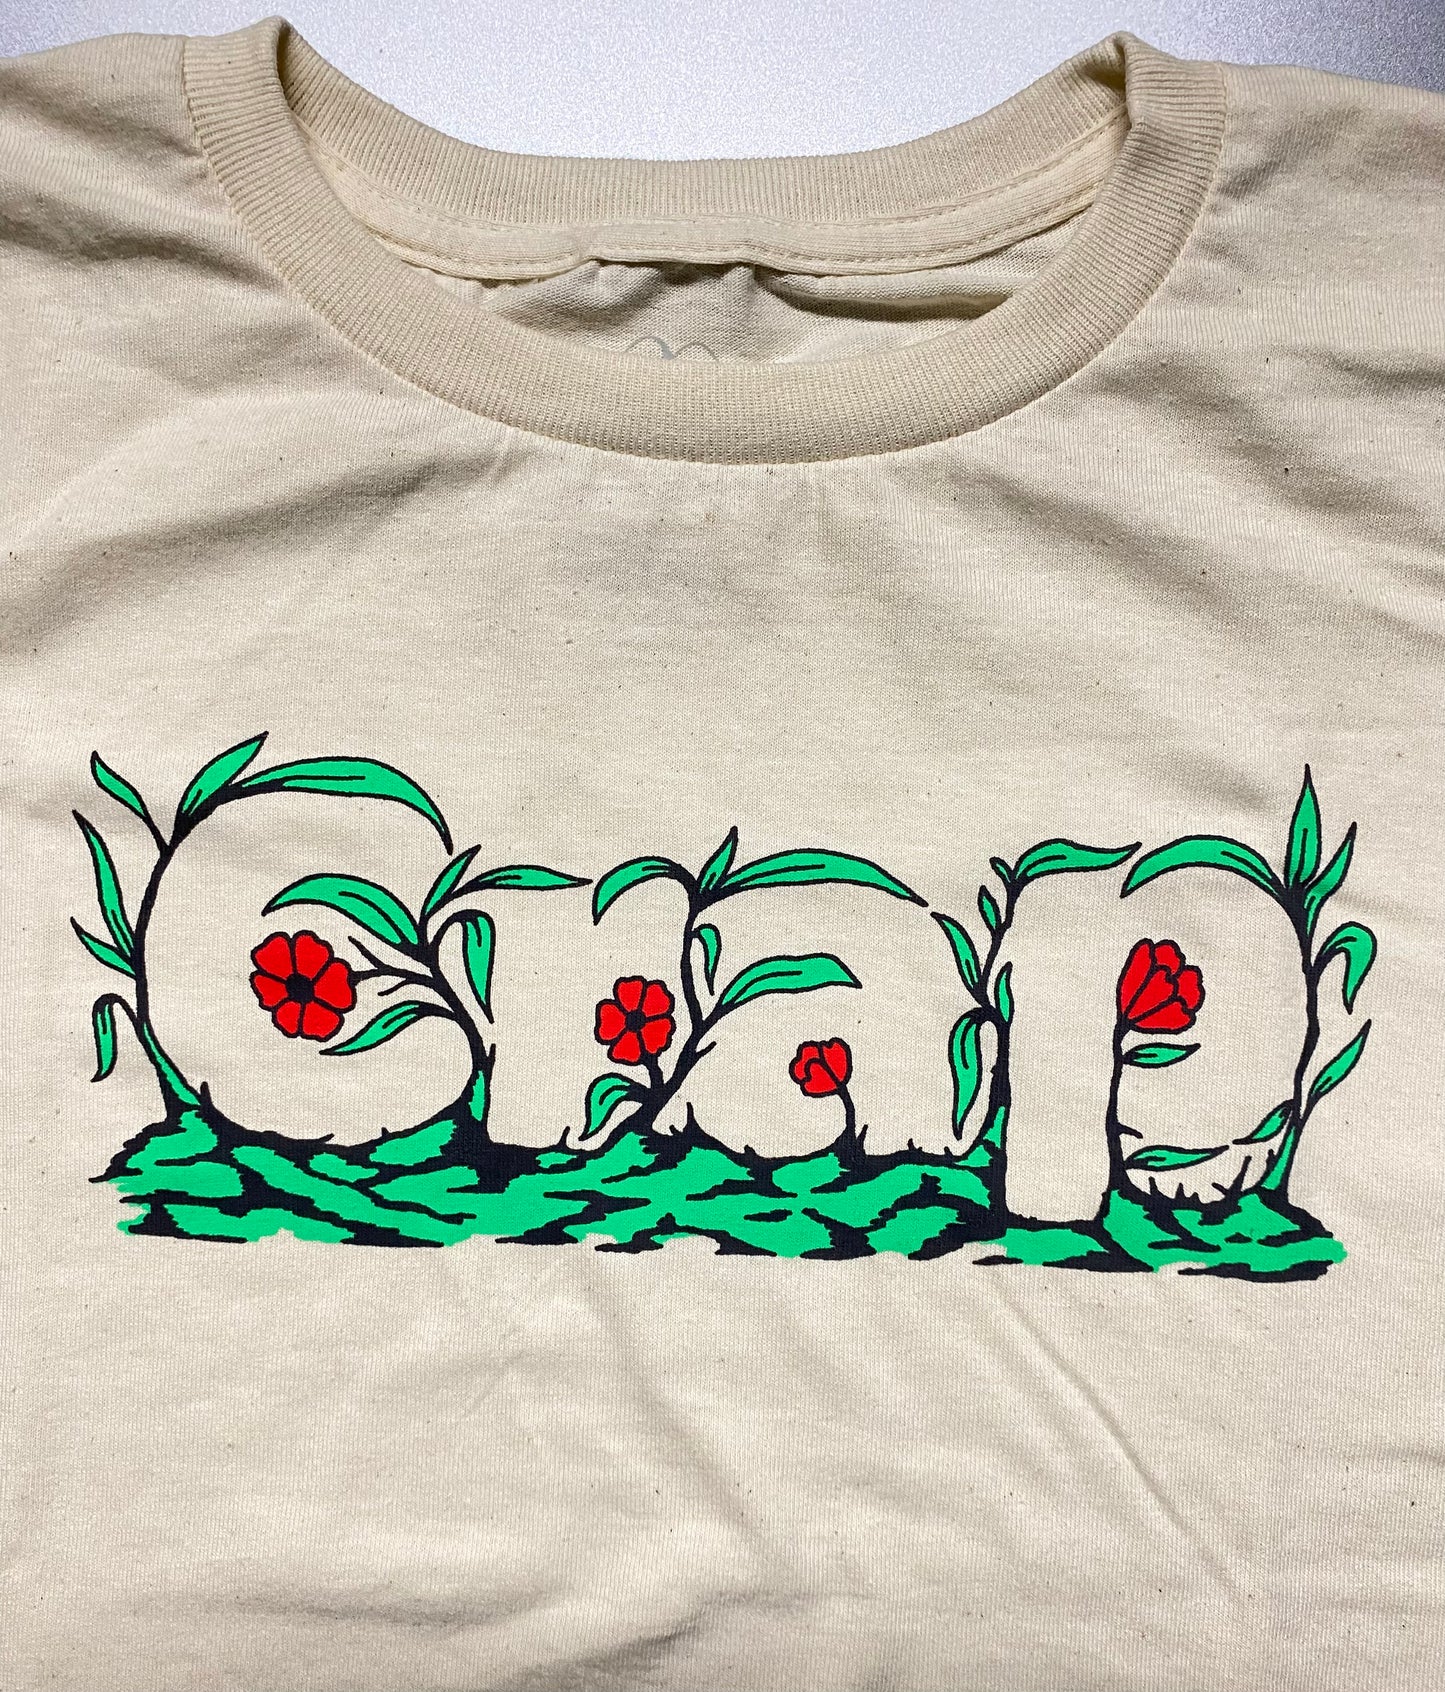 A close up of a cream colored short sleeve tee with the word "Crap" printed on the chest area that is camouflaged in green leaves and red flowers.